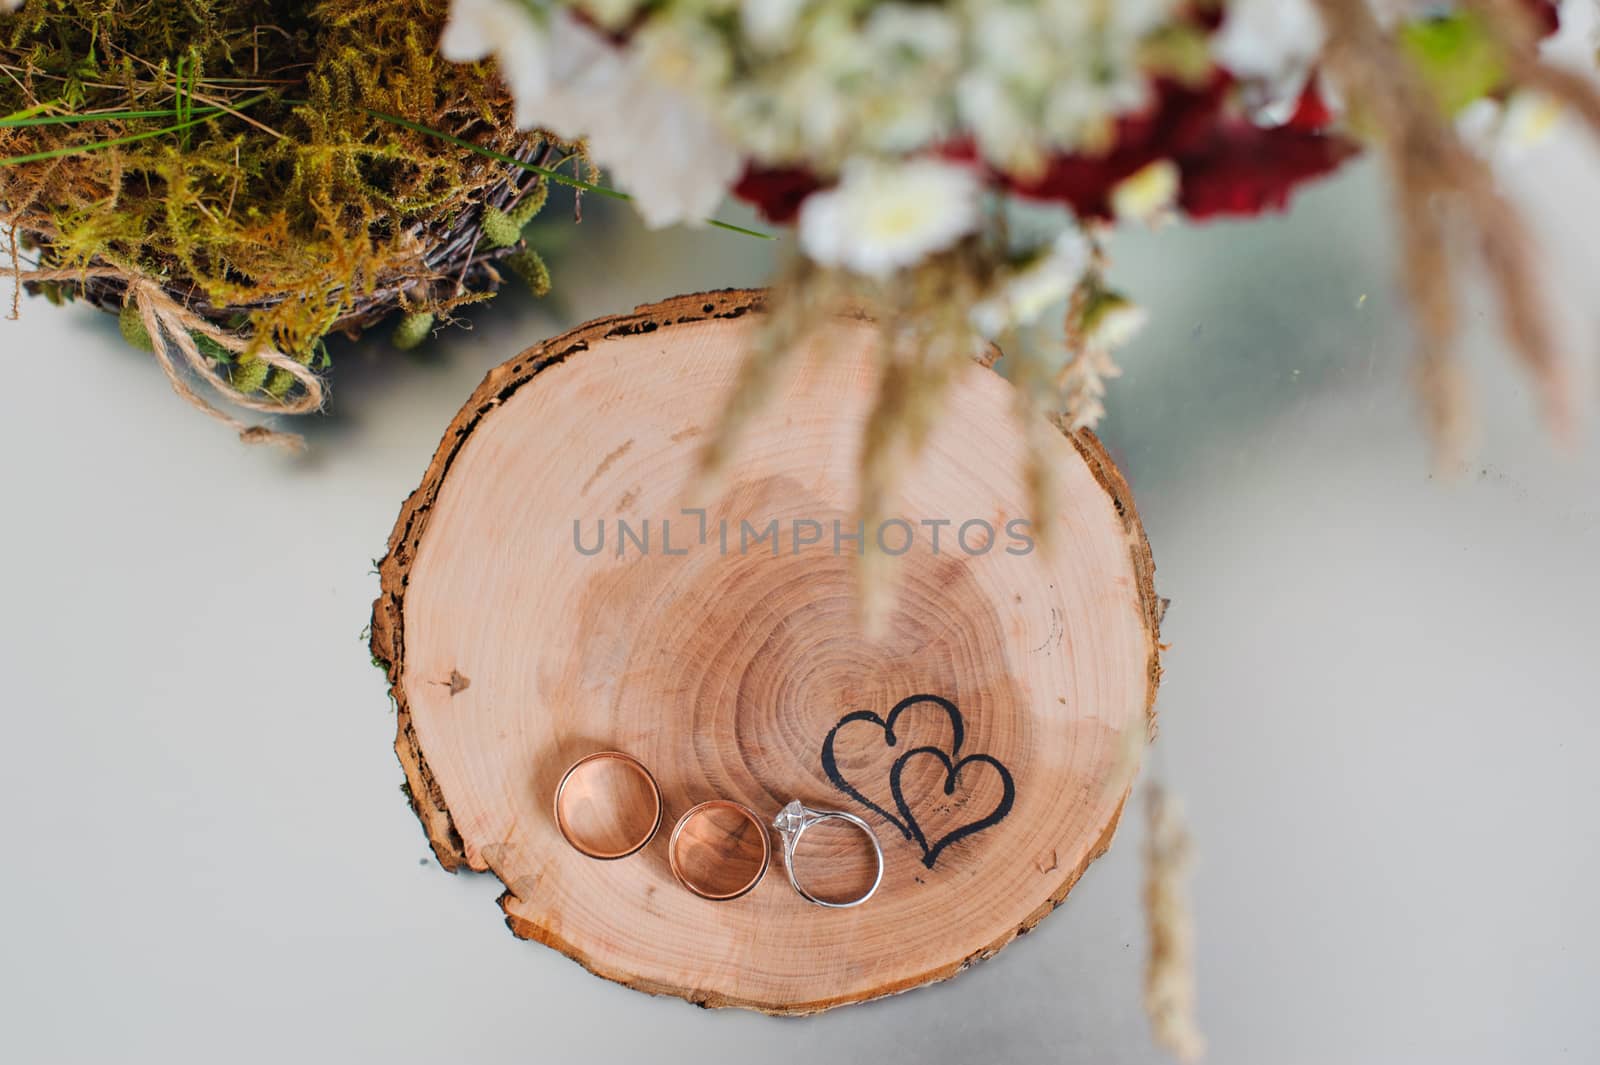 wedding rings on a wooden stump in a rustic style by timonko